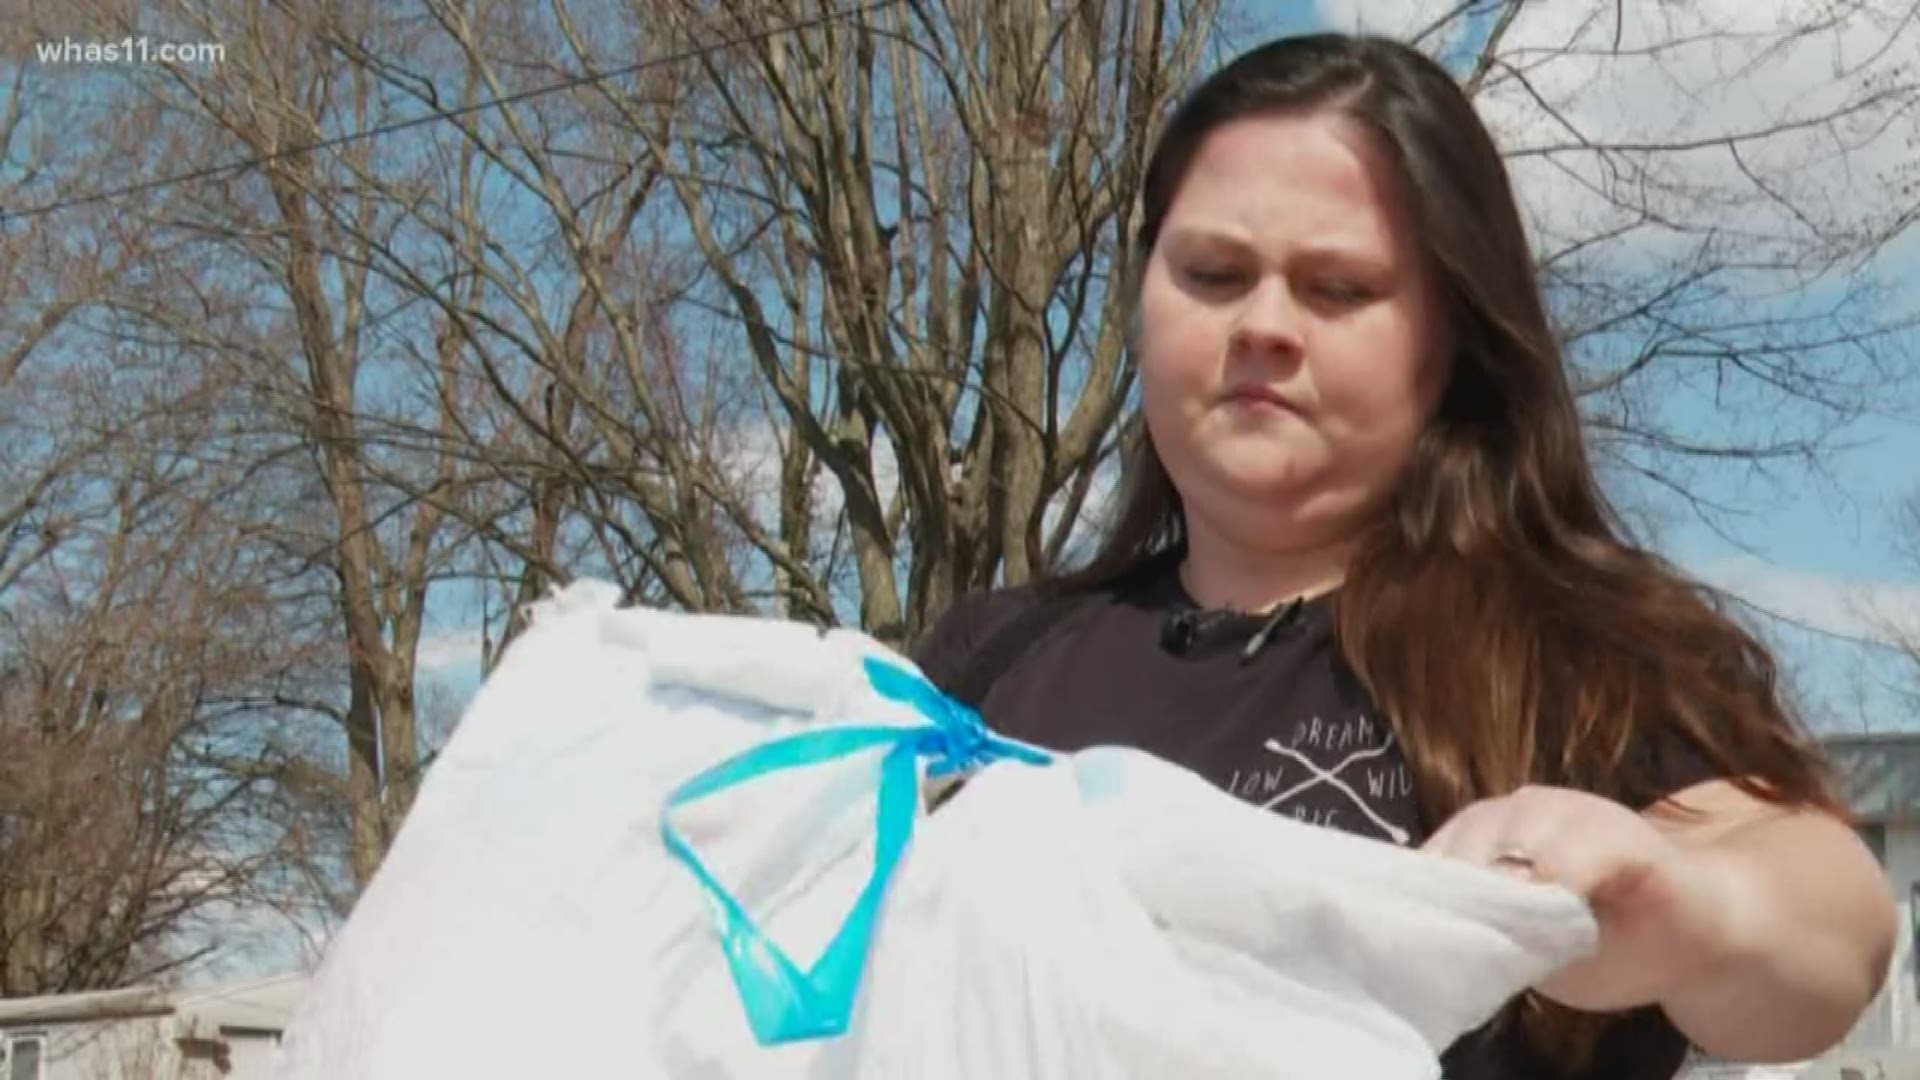 A Louisville woman is collecting donations for Nashville victims after tornadoes devastated the area.